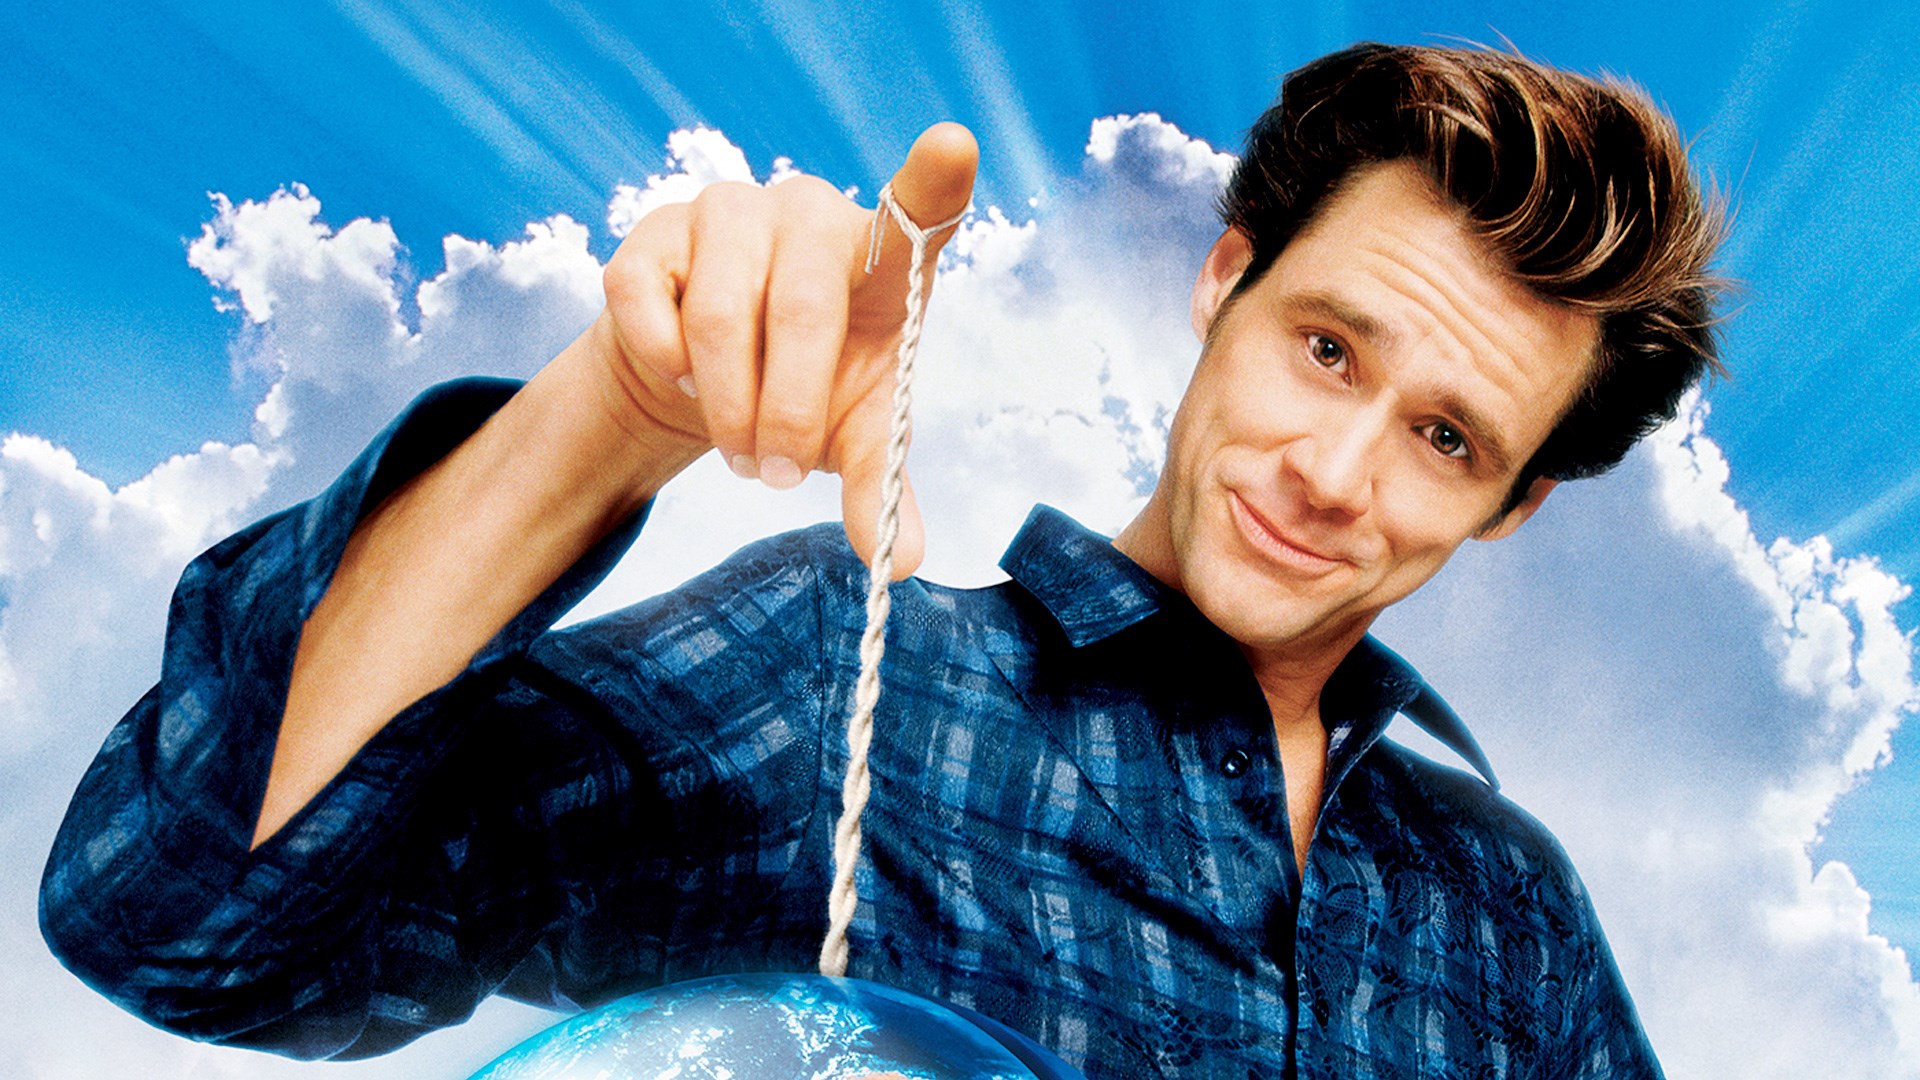 bruce almighty HD wallpapers Backgrounds